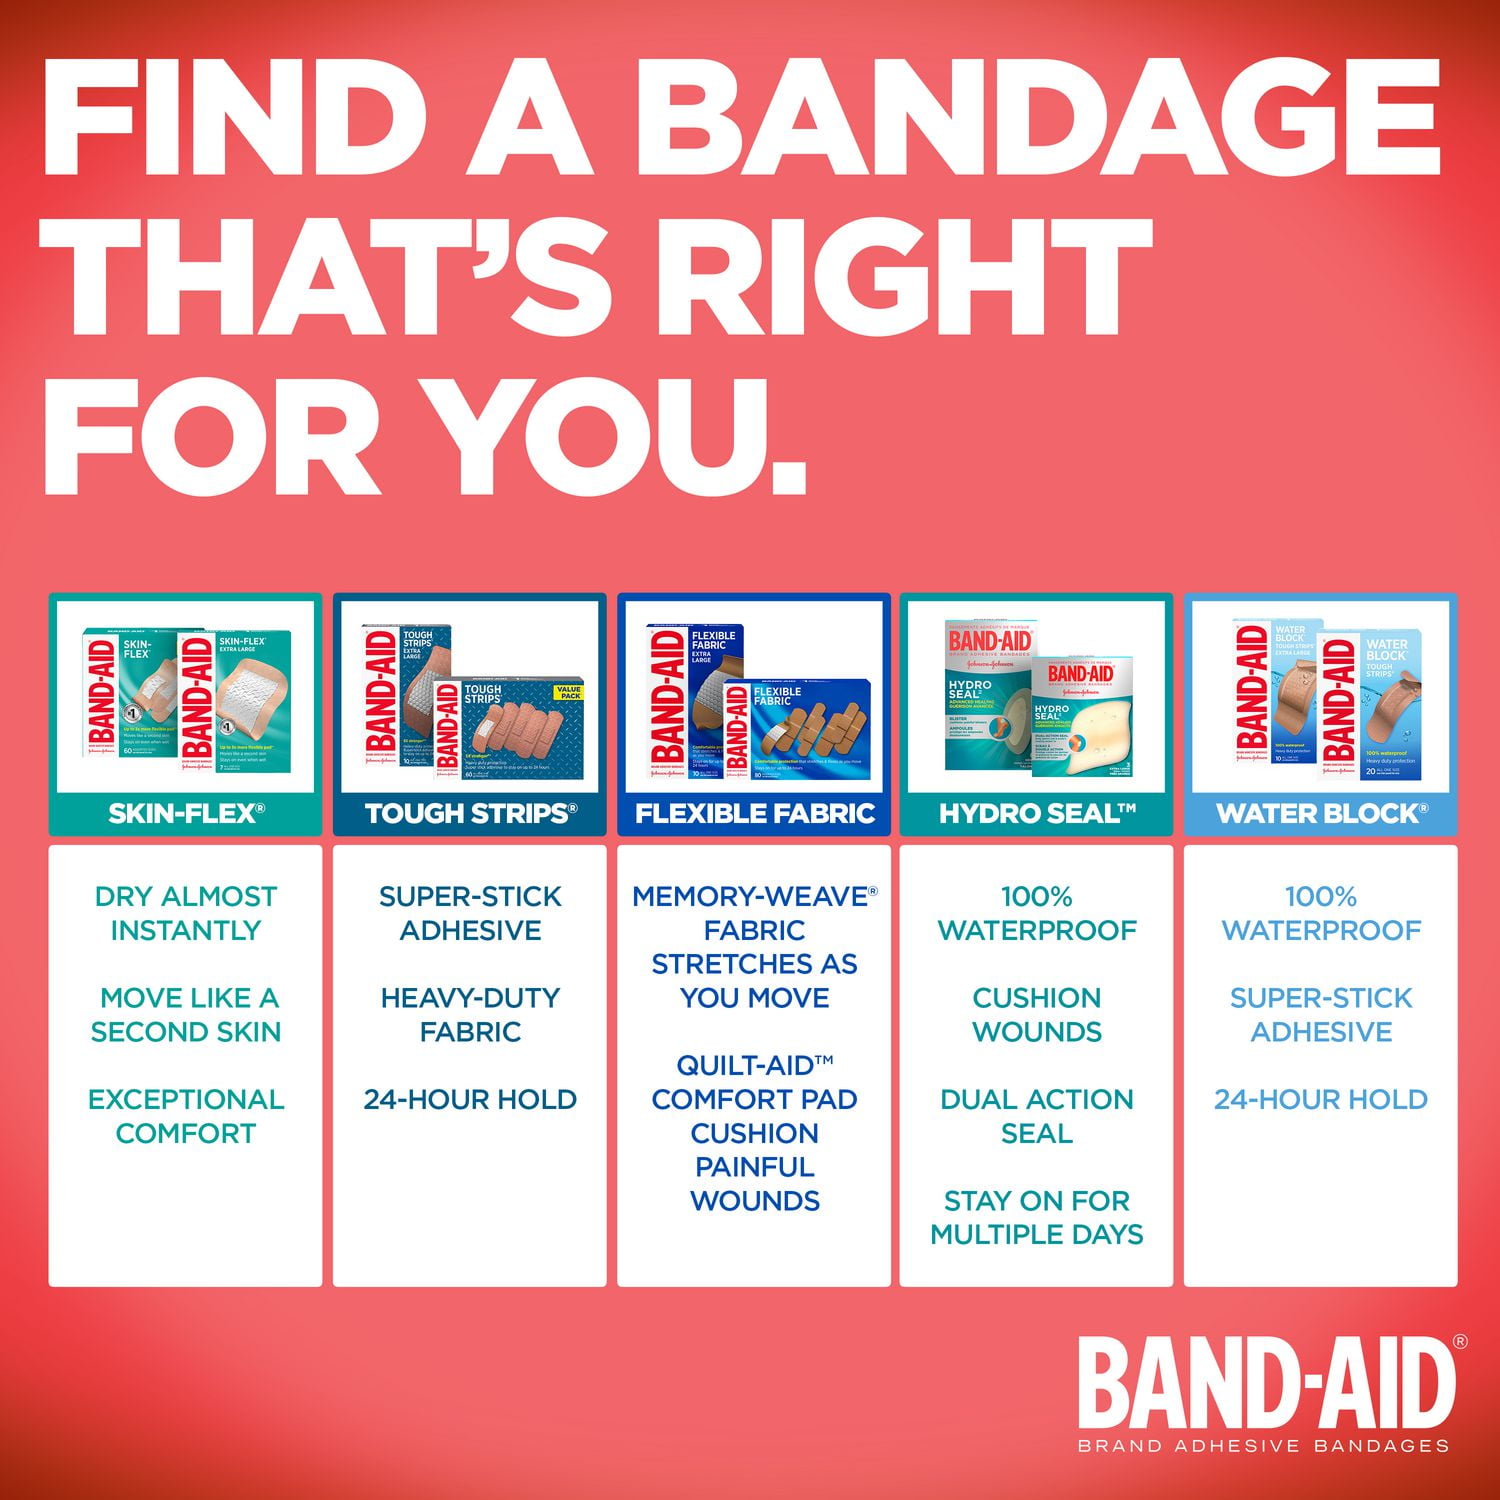 20 BAND-AID BRAND ADHESIVE BANDAGES TOUGH STRIPS BOX 5X STRONGER HEAVY DUTY  OS